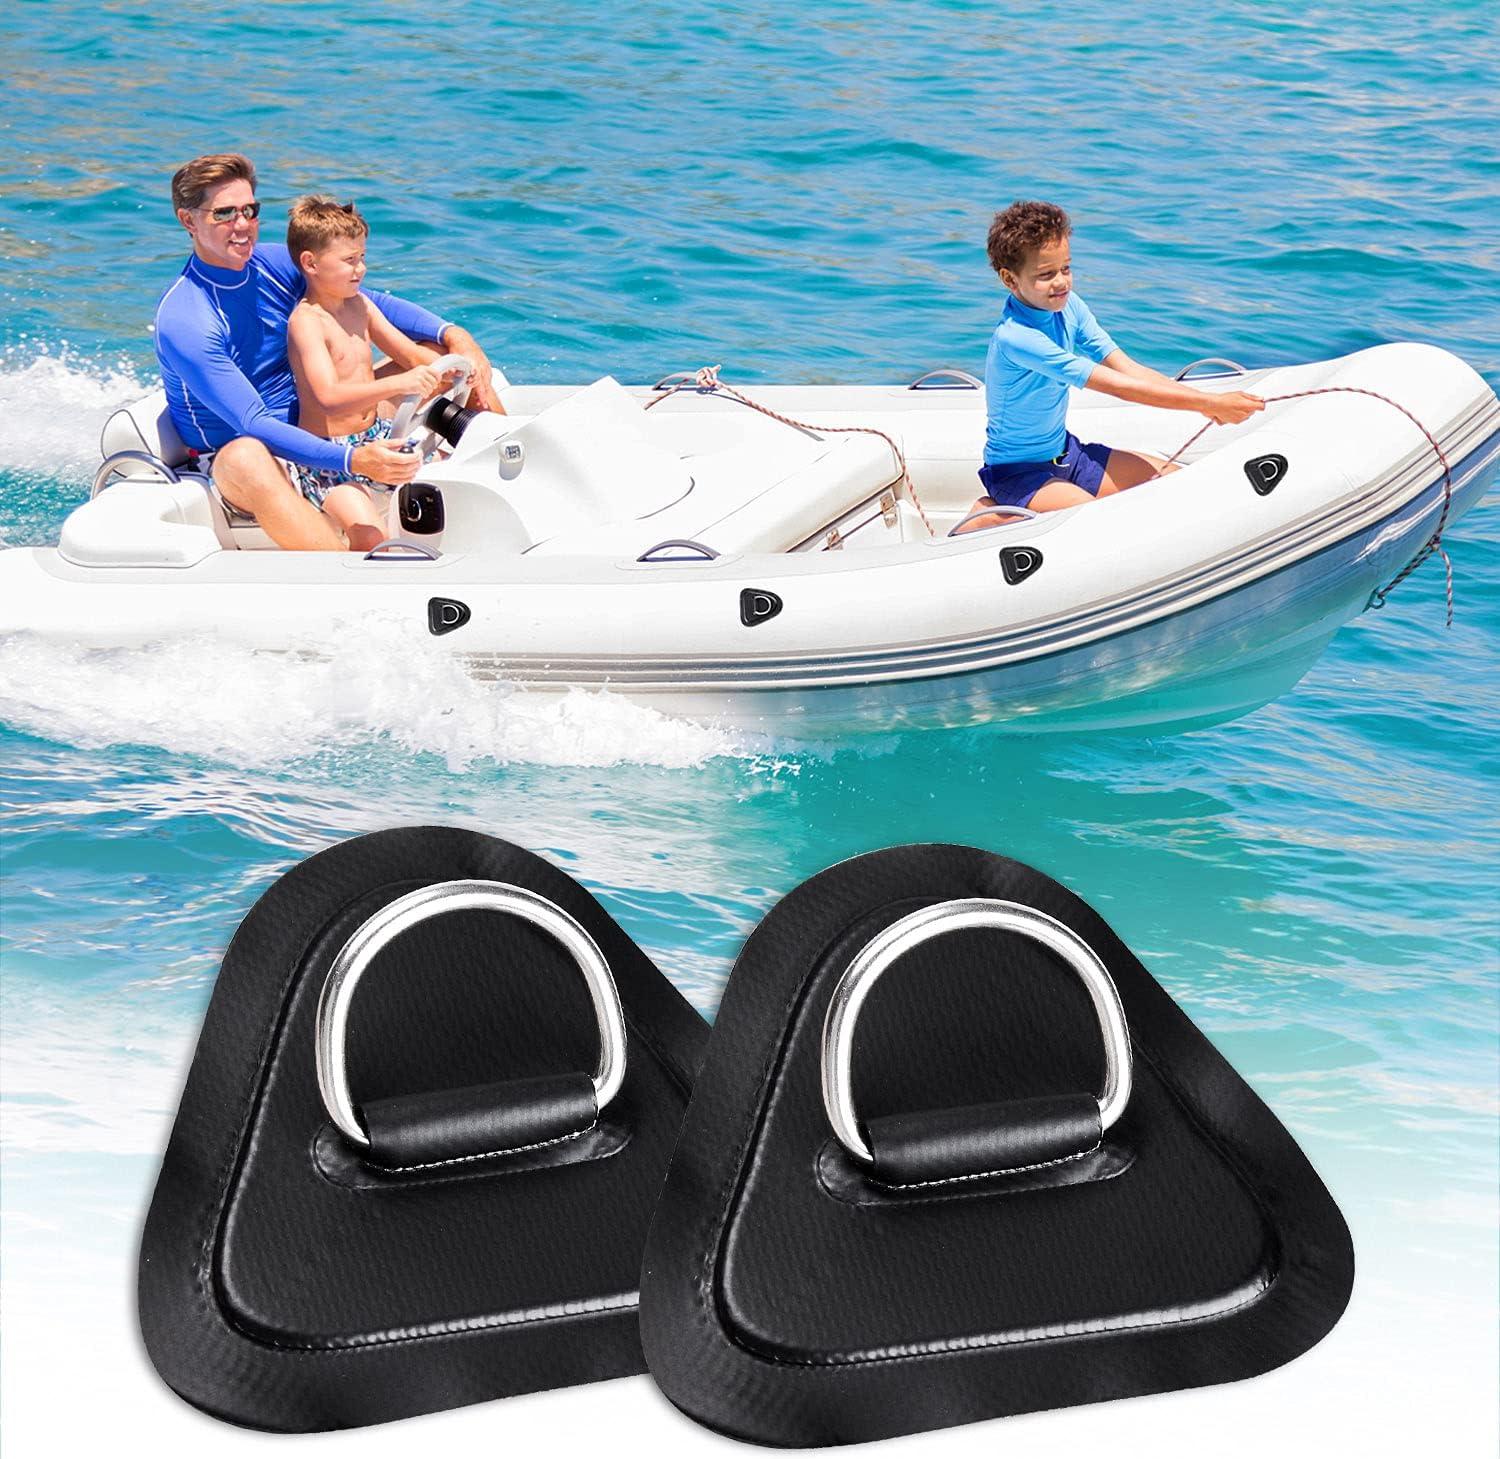 Innovative Scuba Trow Rope and Bag for Boating, Scuba Diving, Kayak, Canoe, Water Sports - 75 Feet , FL0701